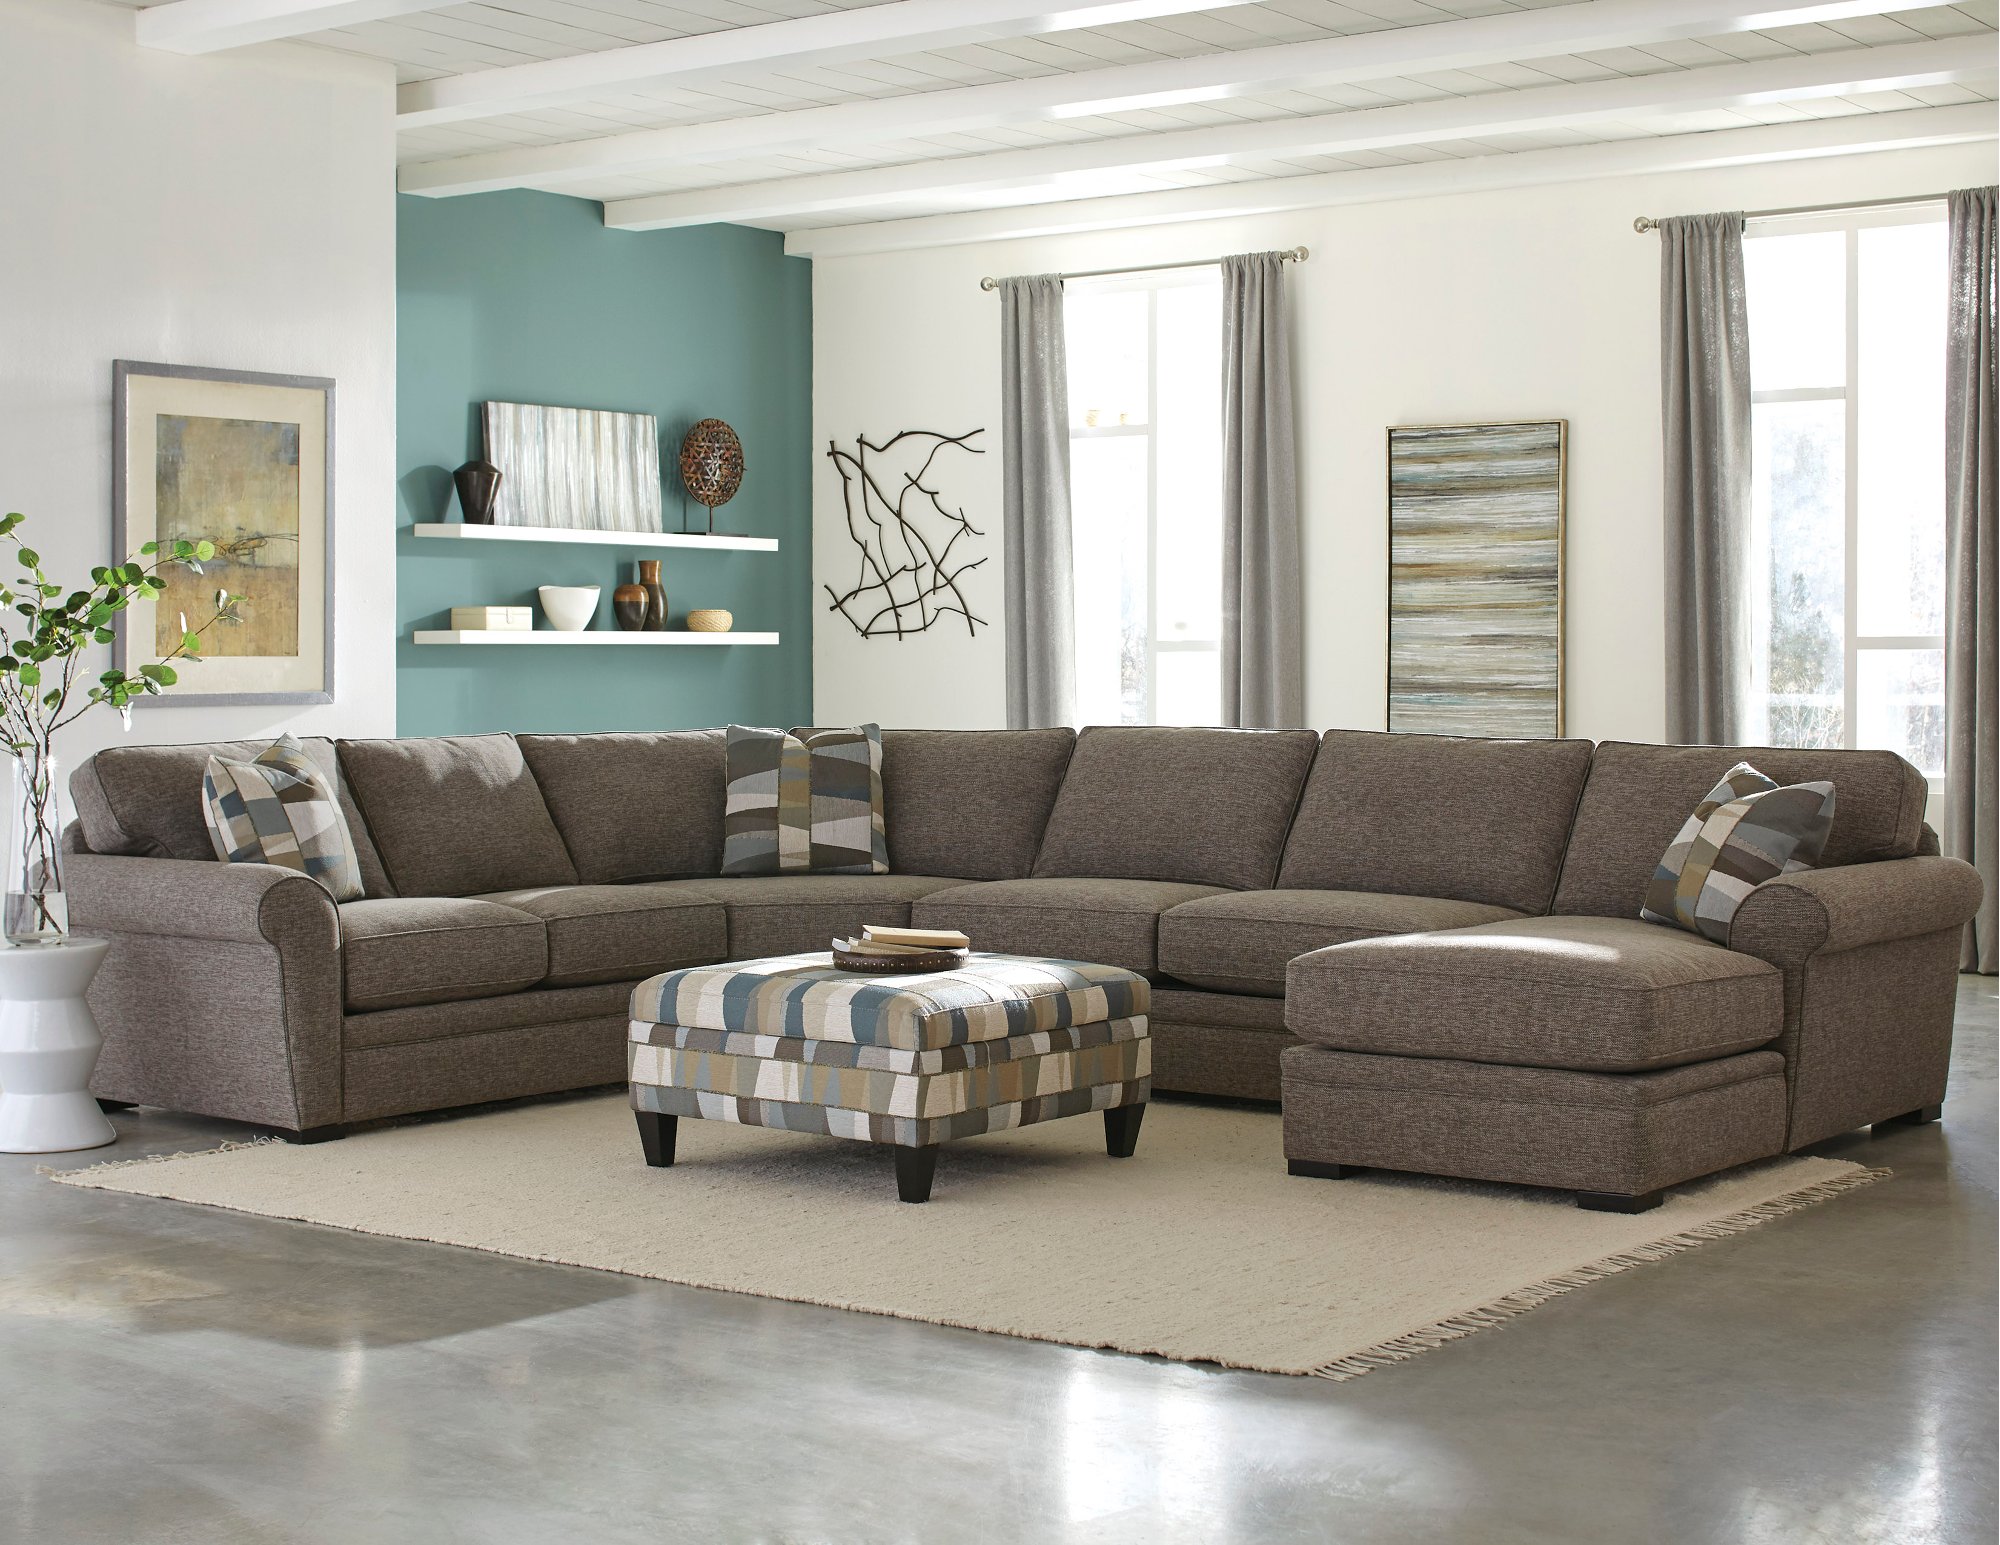 bryson leather 4 piece sectional sofa